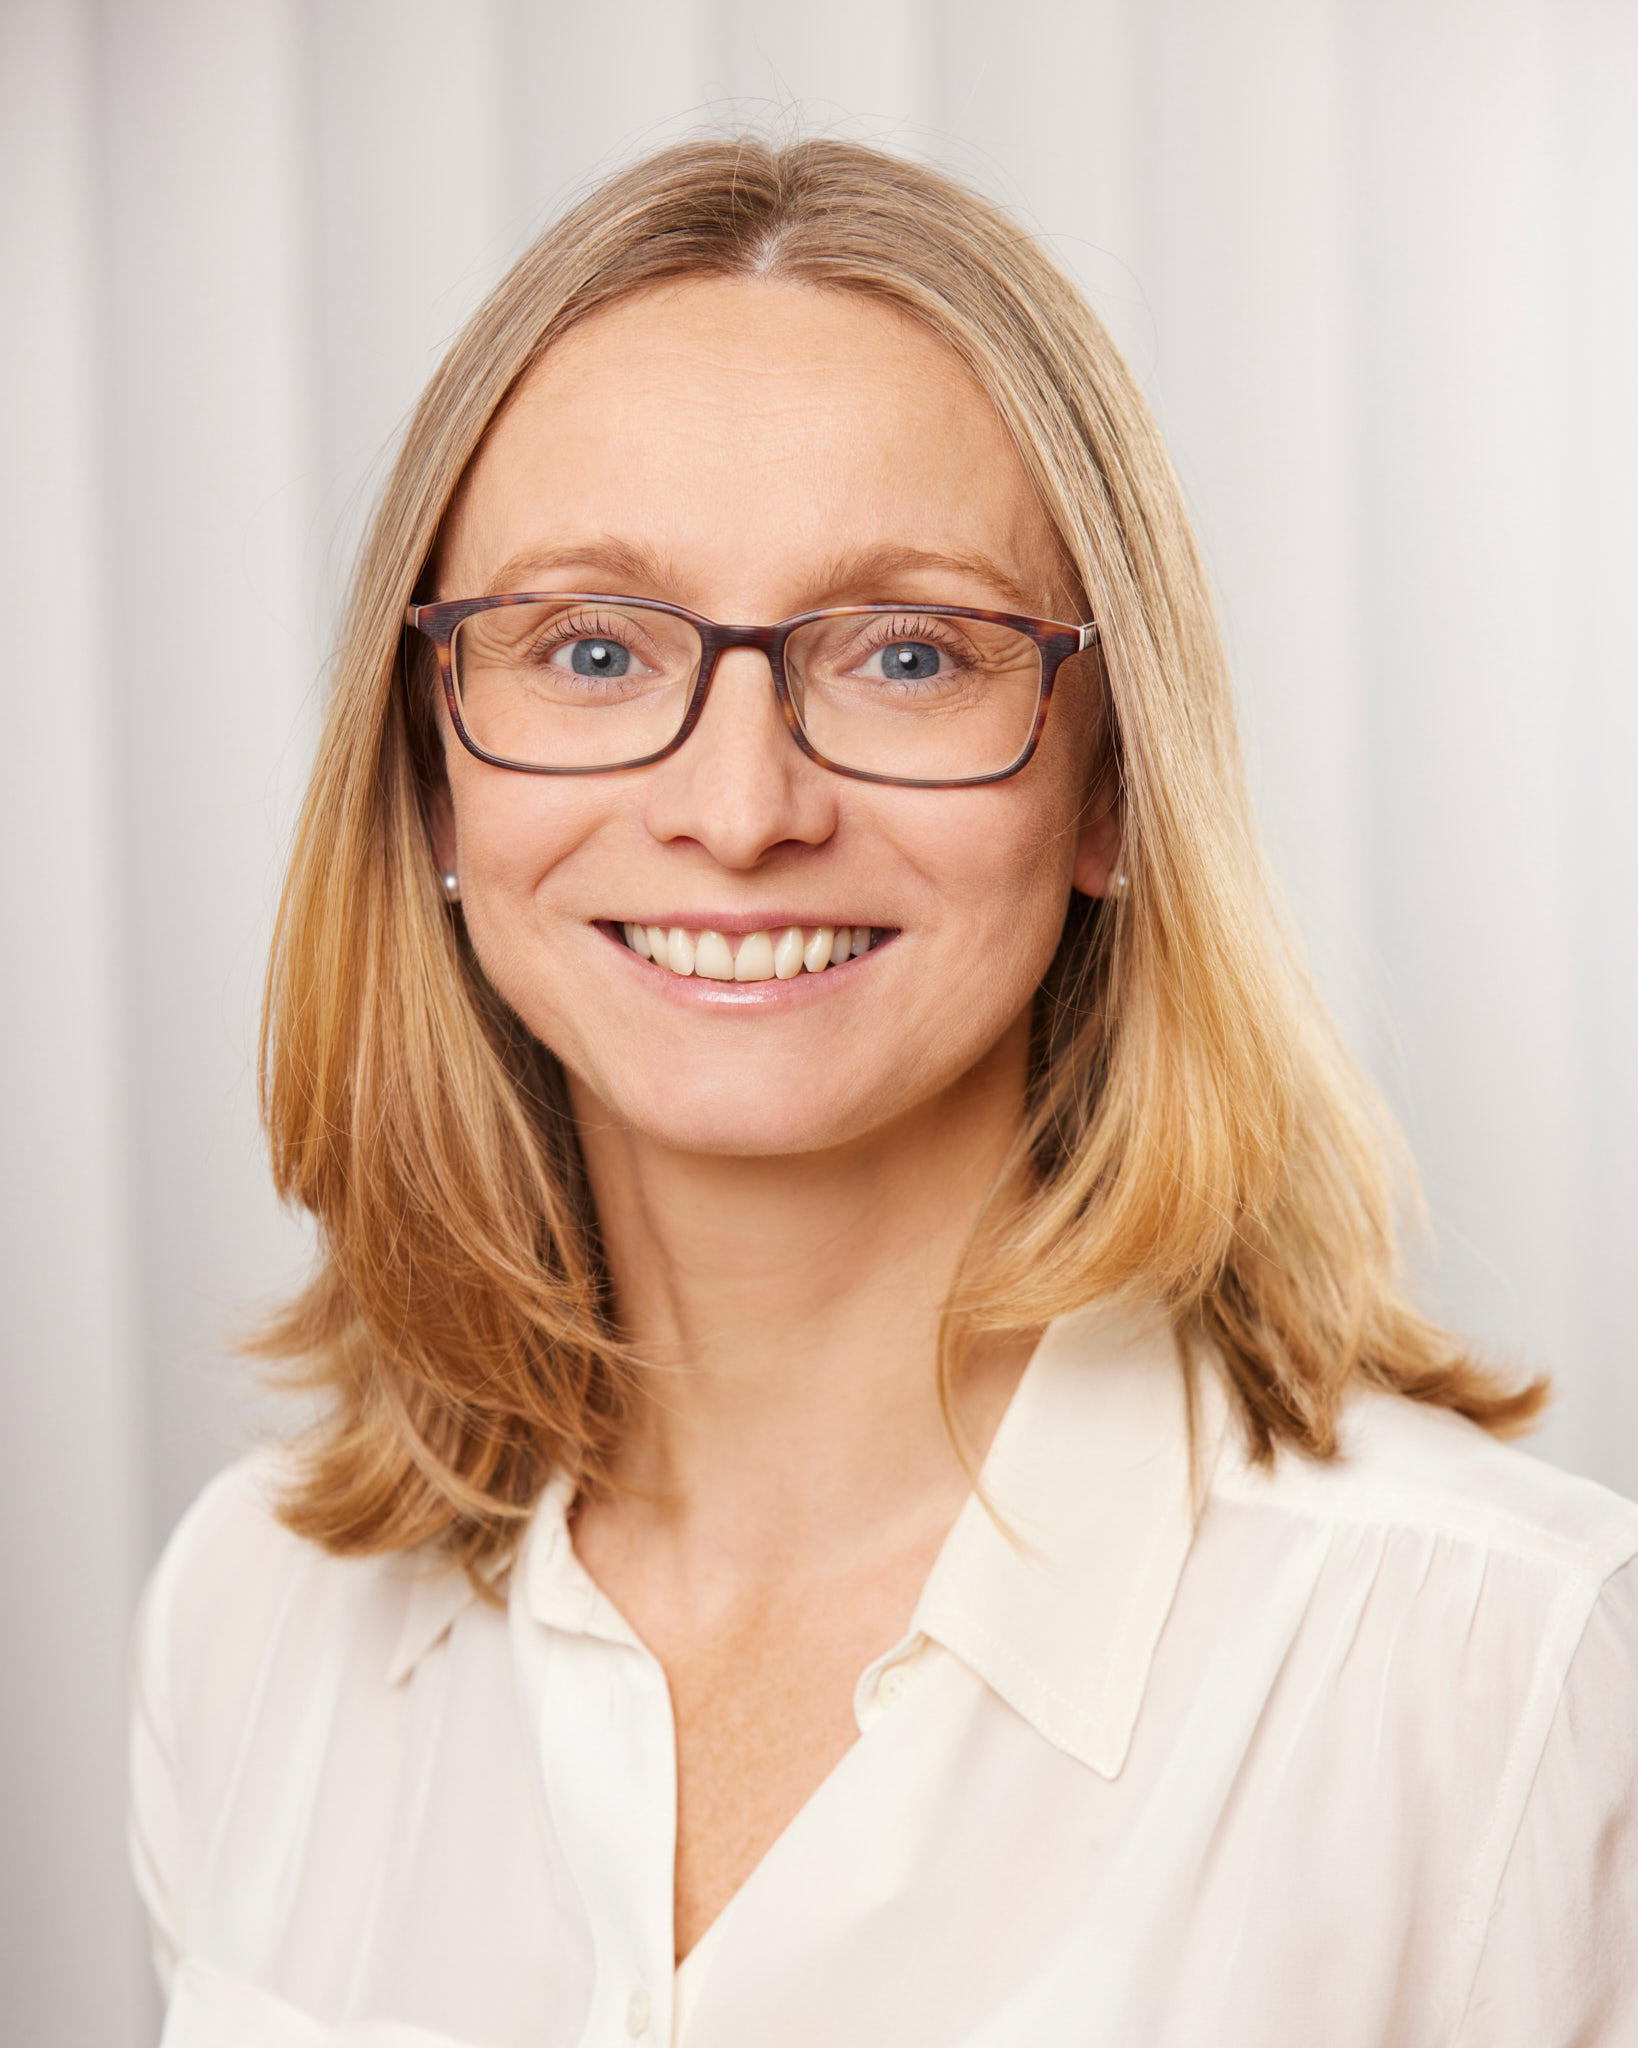 Anne Killmeyer | Photonic Assistant and Marketing